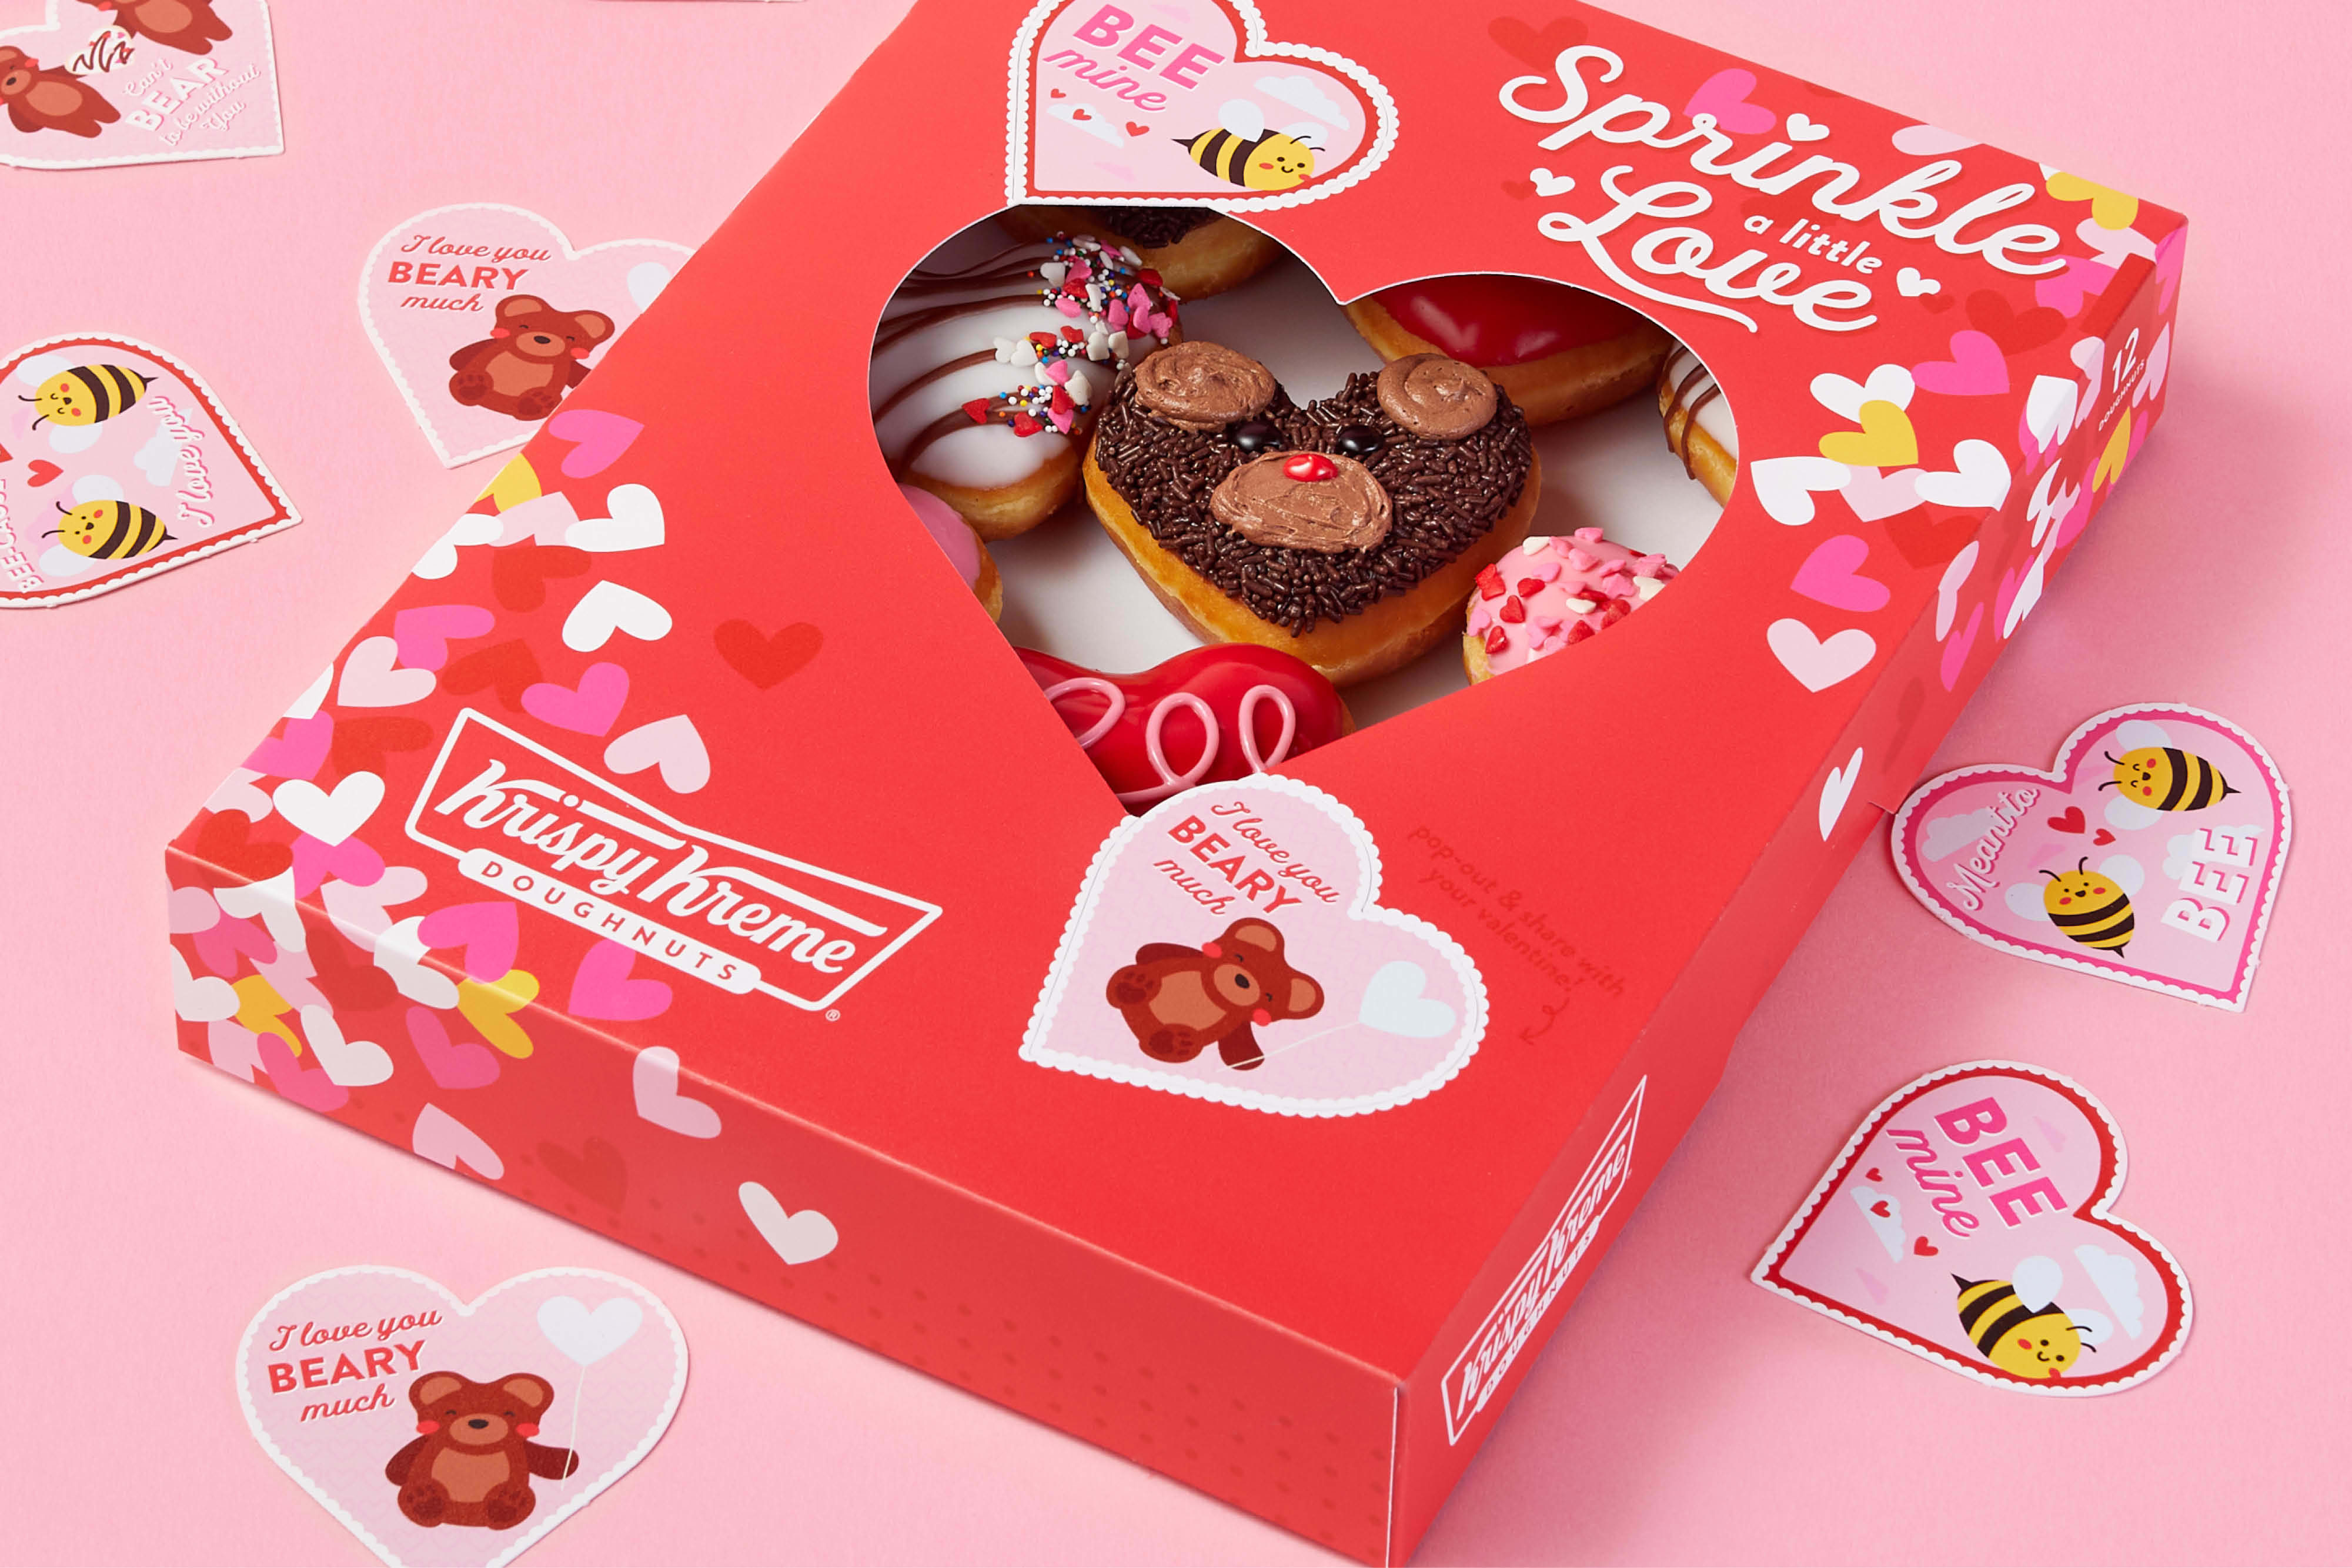 Our favorites from our Valentine's Day Box 🤩 #donuts #donutshop #cout